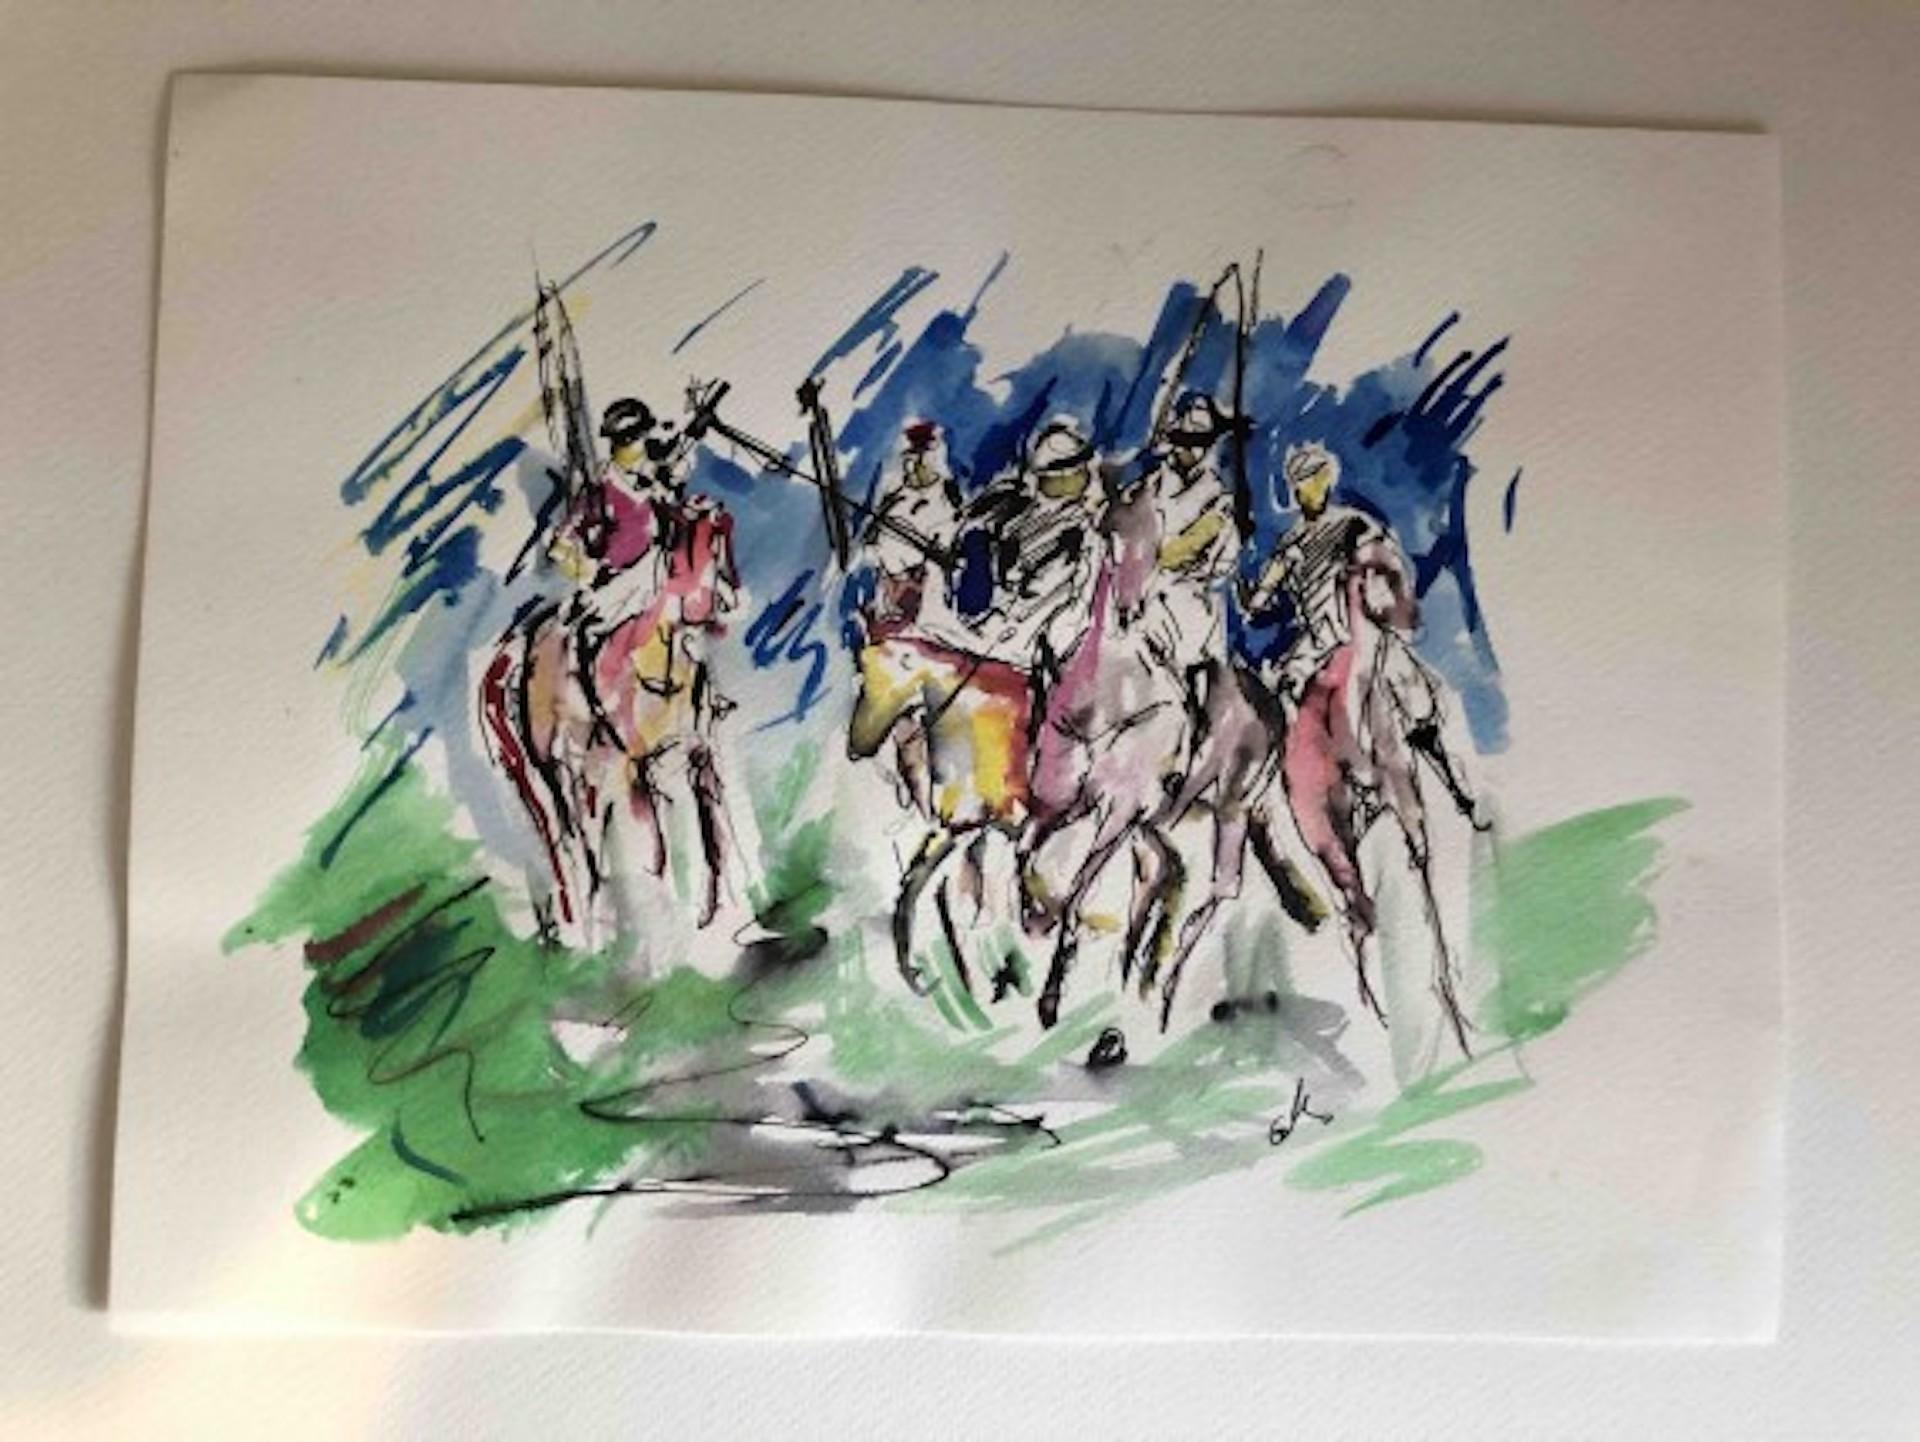 Garth Bayley
Polo Players 
Original
Figurative
Pen and ink on watercolour paper
Image size: H:24 cm x W:32 cm
Sold Unframed

Please note that insitu images are purely an indication of how a piece may look

Polo Players is an original painting by